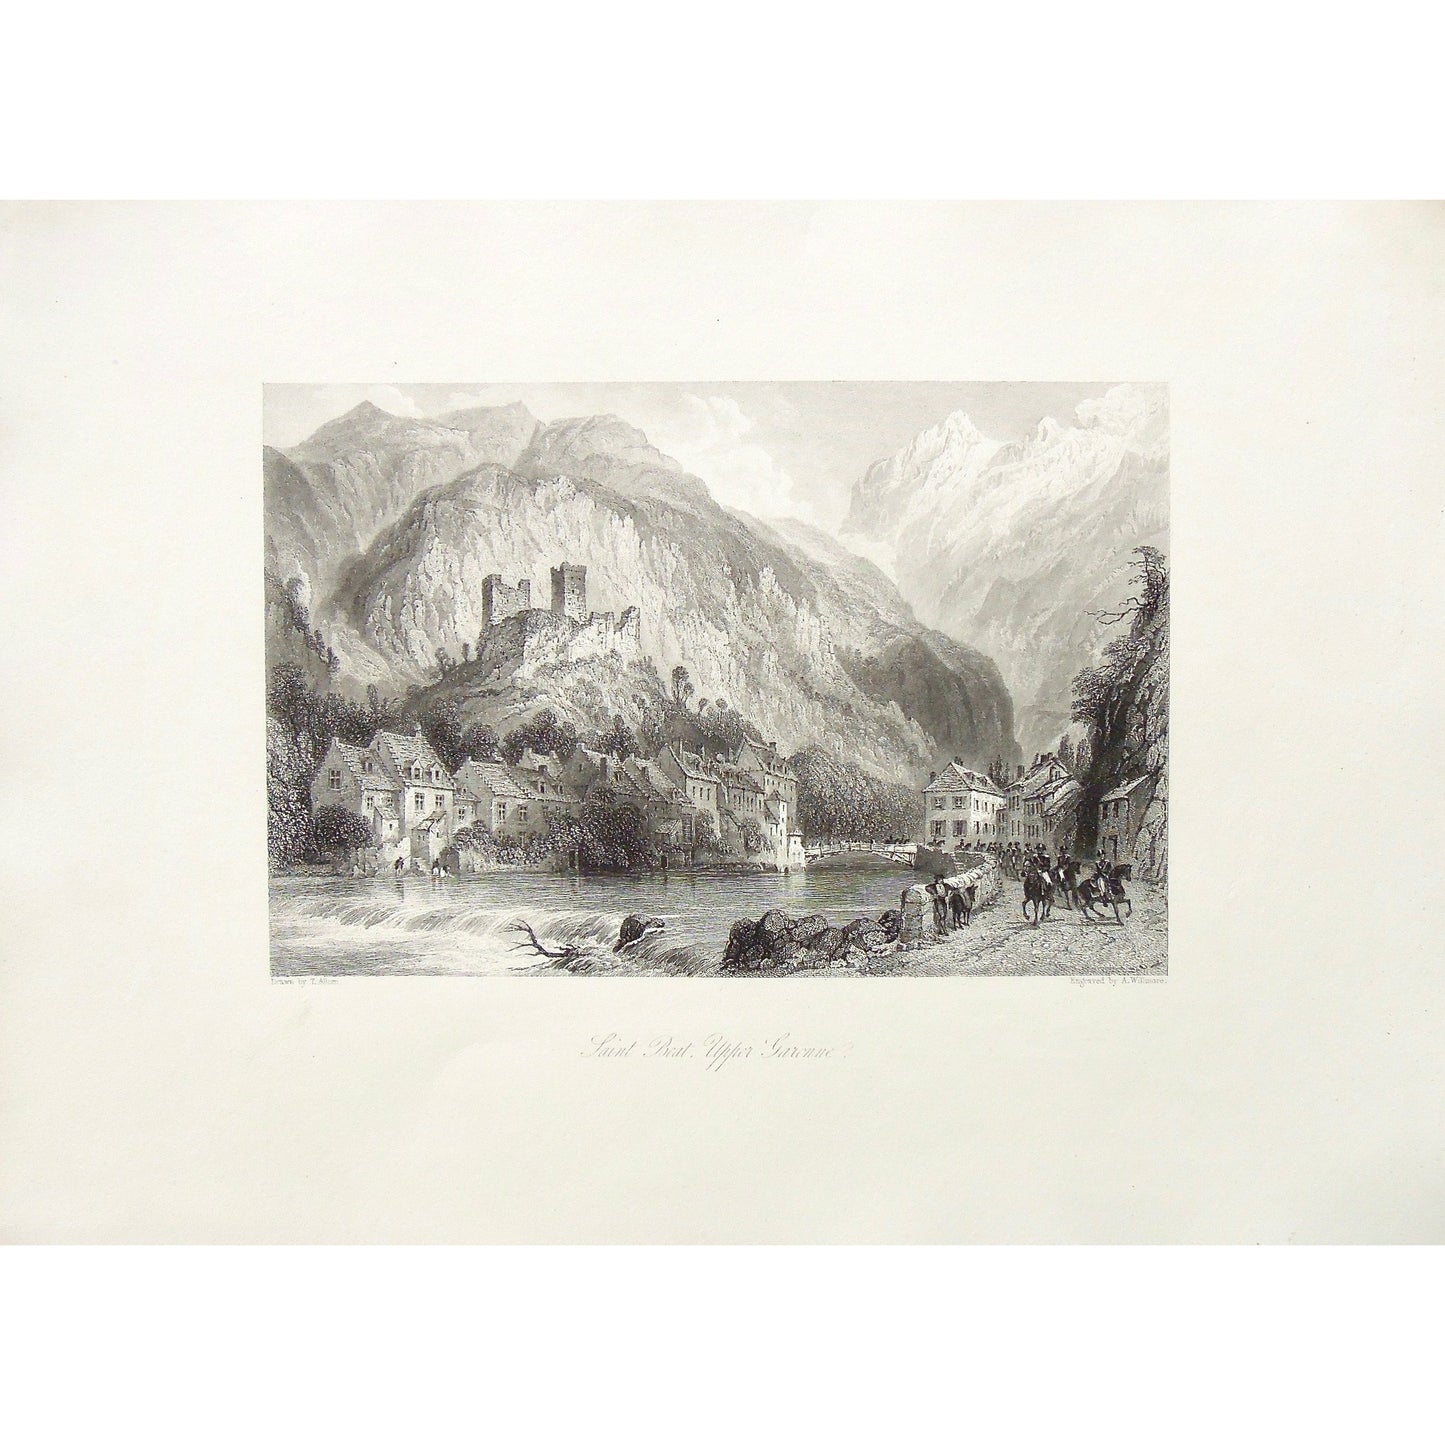 Town, Village, Saint Beat, Upper Garenne, Soldiers, Cavalry, Army, horseback, houses, homes, on the water, bridge, Limestone mountains, mountains, France, Saint Béat, 12th century castle, Haute Garonne, Southwestern France, Allom, Thomas Allom, T. Allom, Willmore, A. Willmore, Steel engraving, Europe Illustrated, London Printing and Publishing Company, London, 1876-79, 1876, 1879, Sherer, John Sherer, Antique Print, Antique, Prints, Vintage, Vintage Art, Vintage Prints, Art, Wall art, Decor, wall decor, de